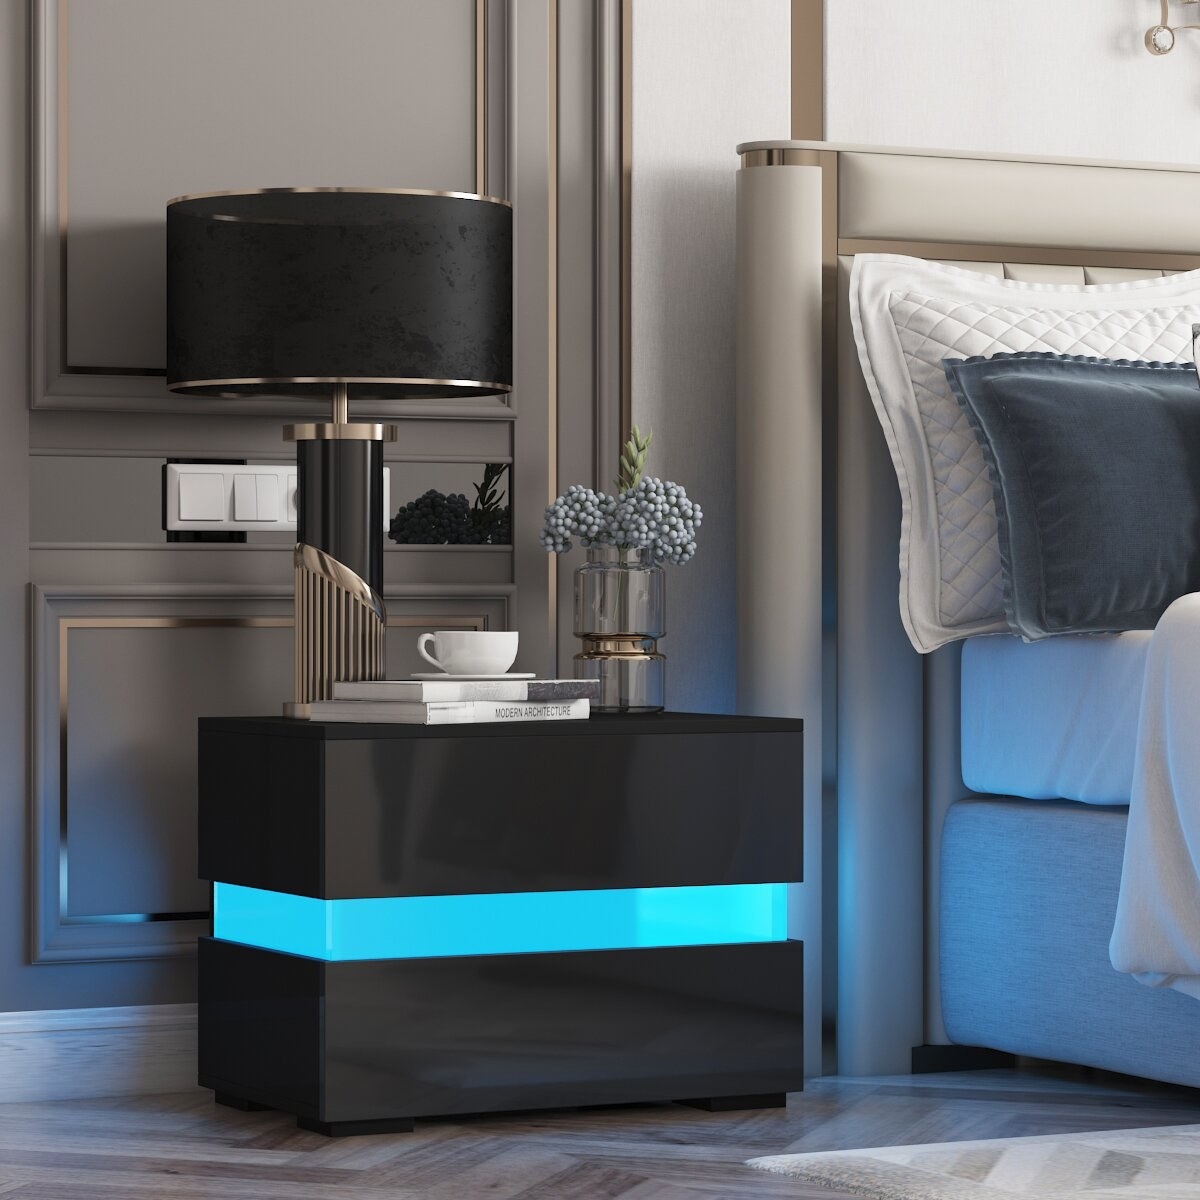 A modern-looking nightstand with an LED light that runs through the middle.